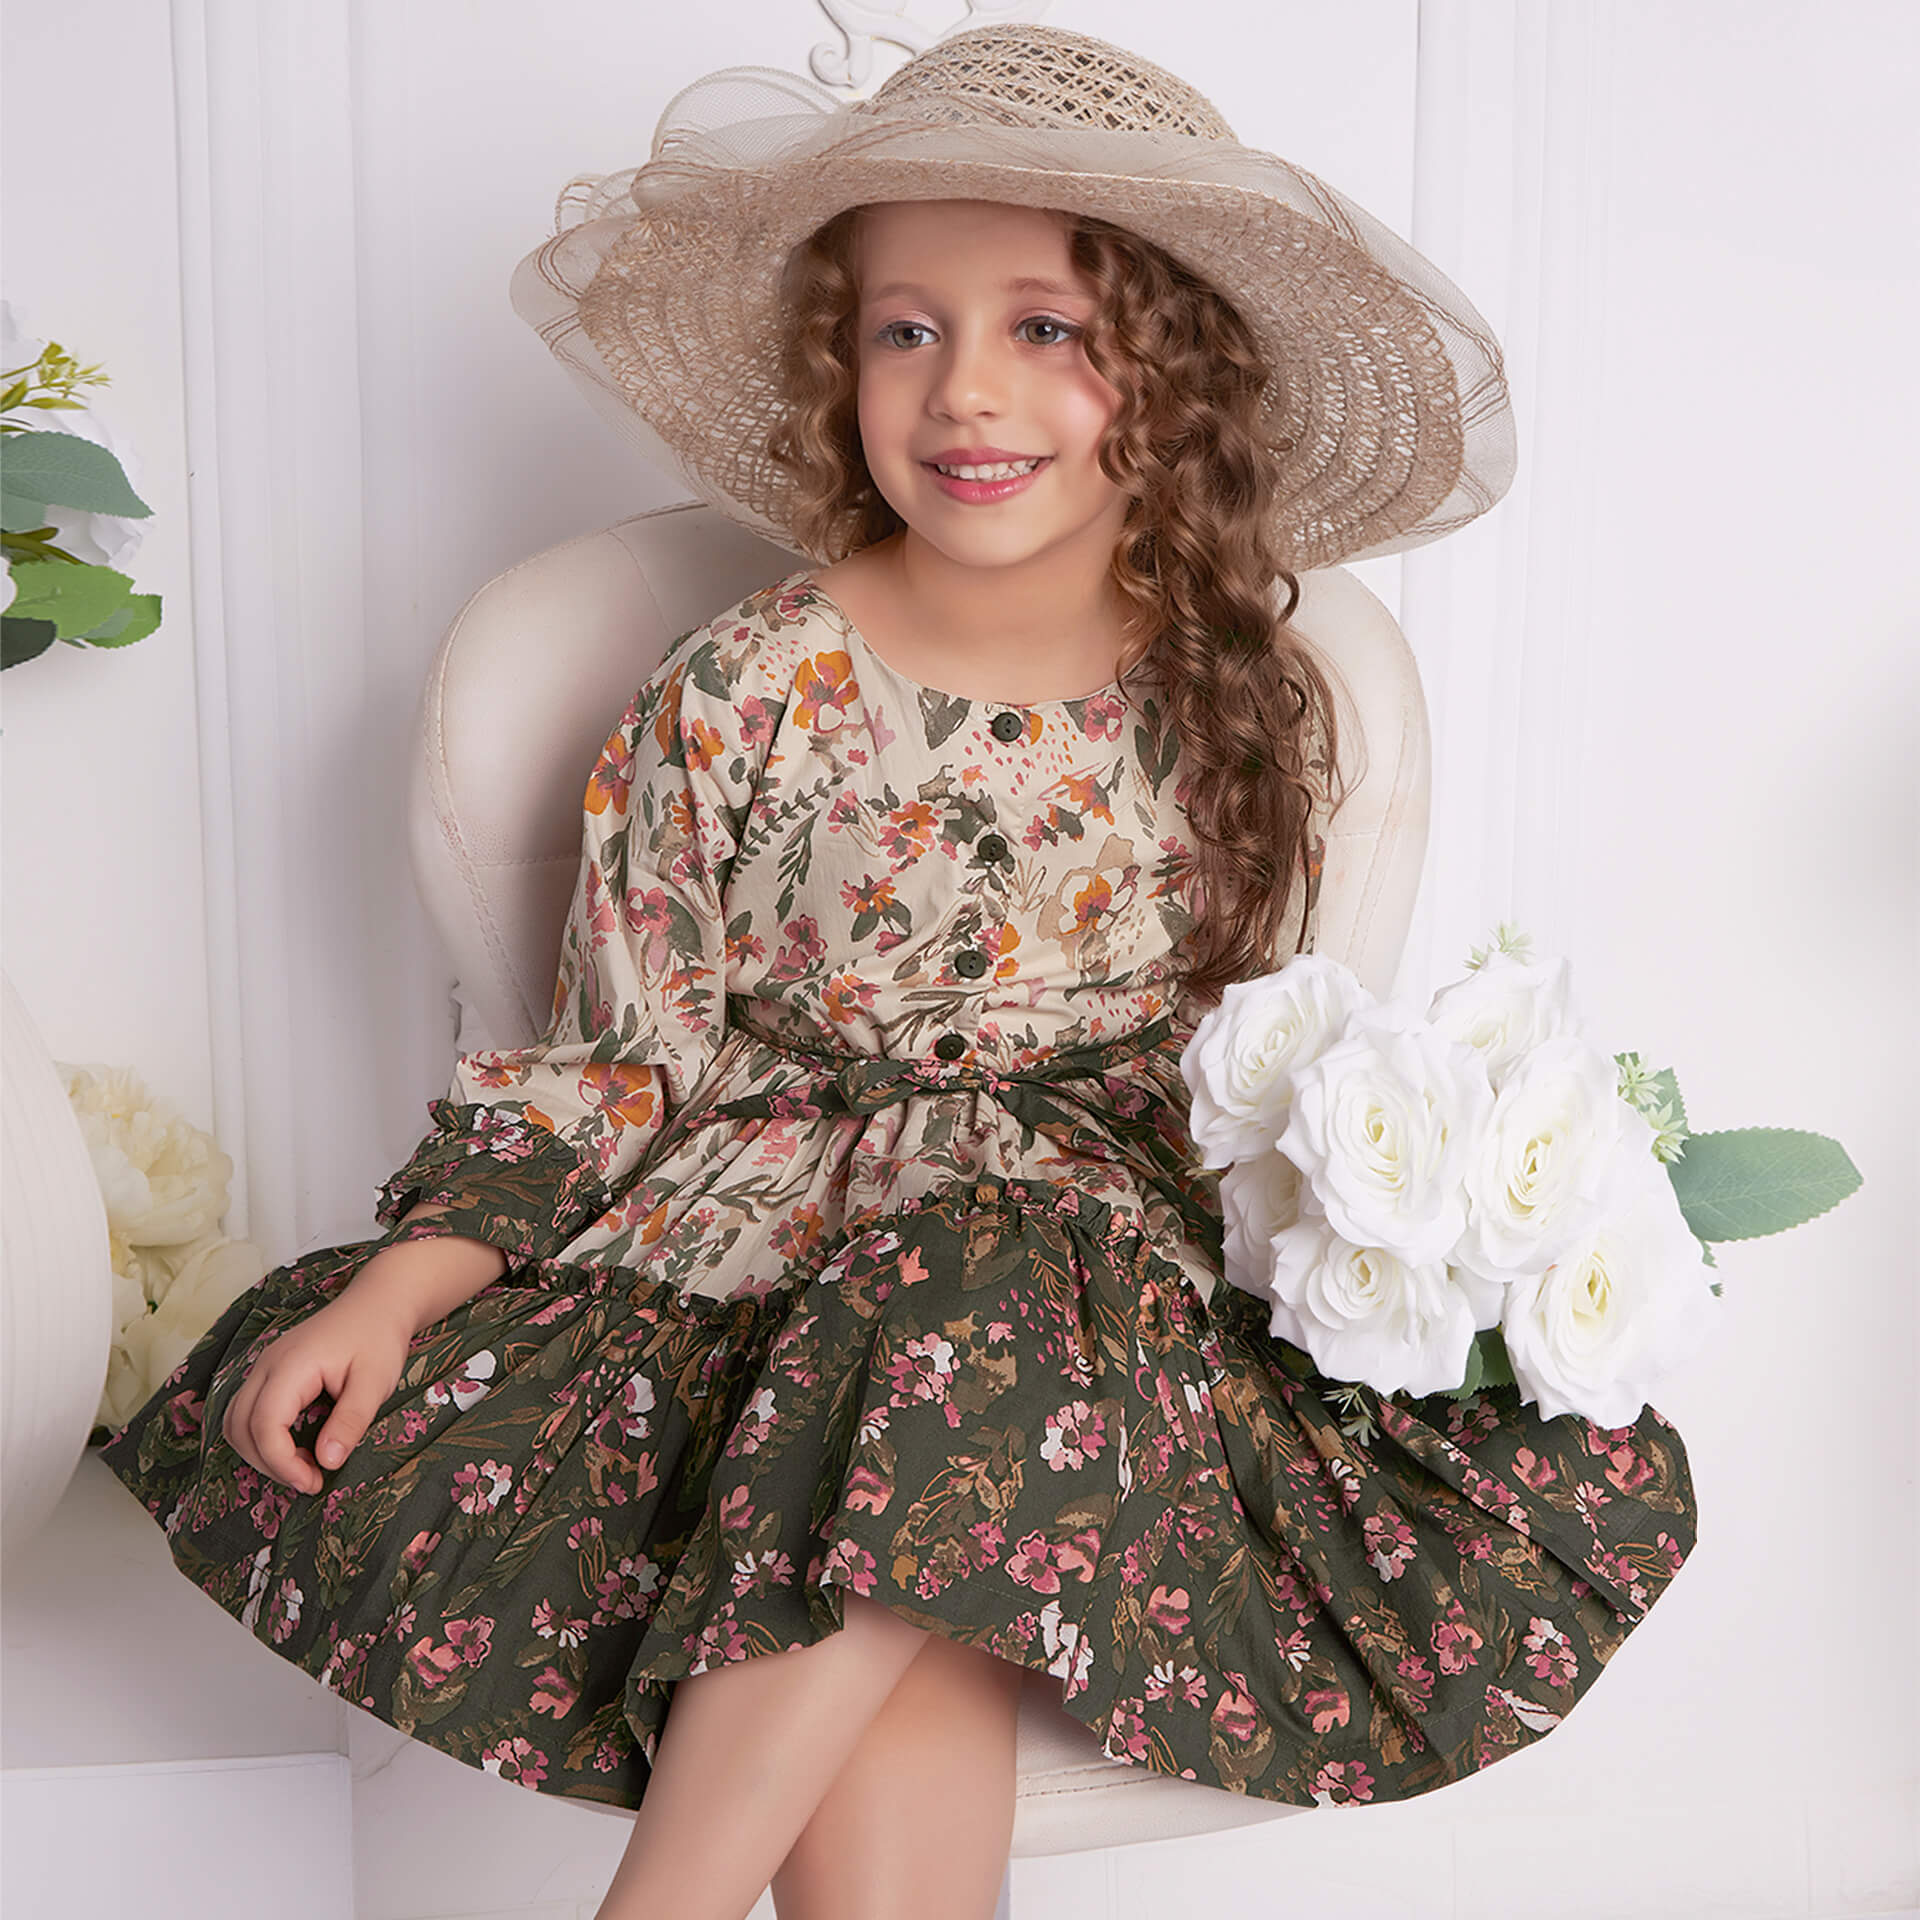 Hat-topped, a little girl seated wearing cream and green floral printed ruffle dress